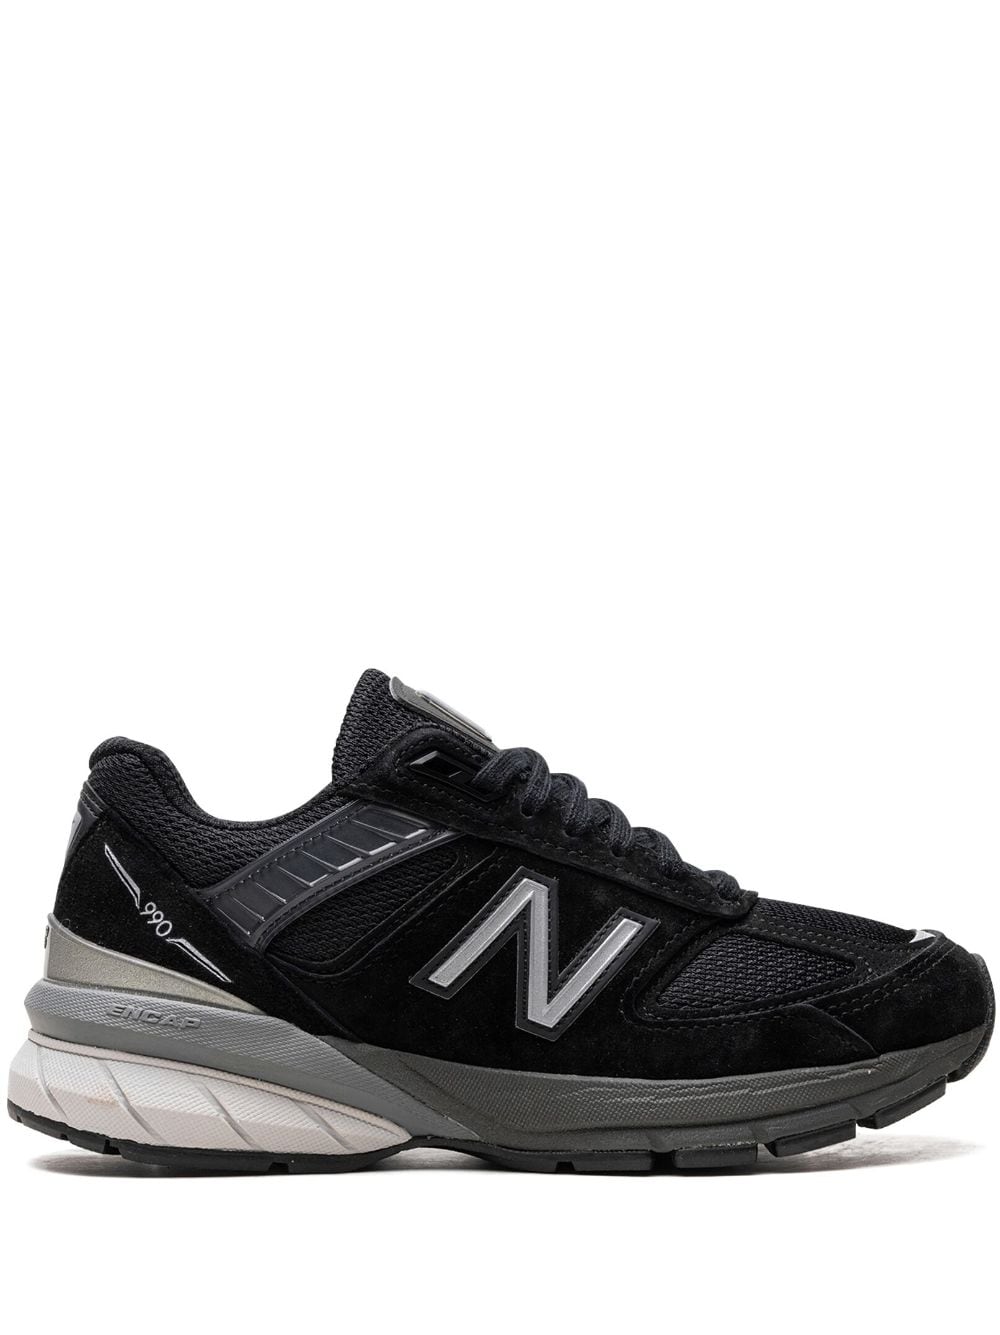 New Balance Made in USA 990v5 Core sneakers - Black von New Balance